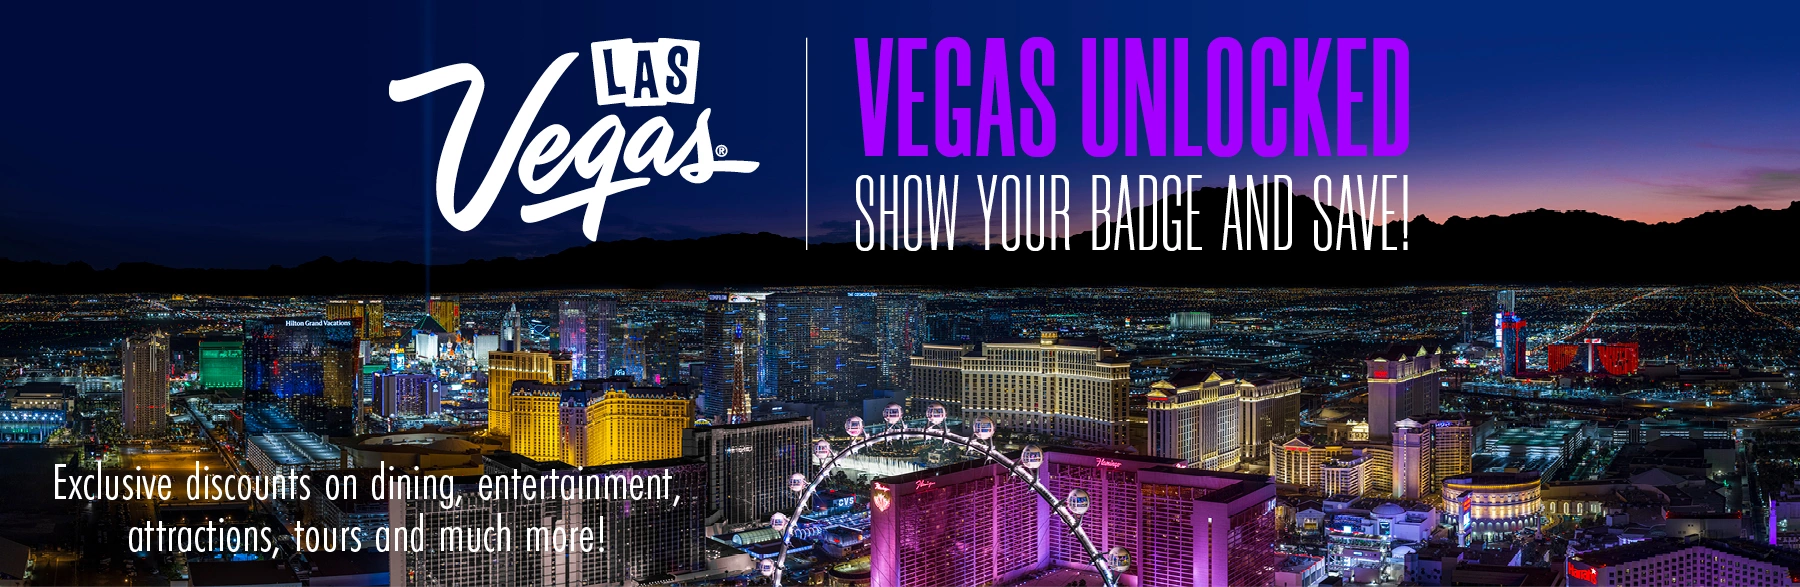 Ariel view of Las Vegas with text "Vegas Unlocked," by Vegas Means Business, the Las Vegas Convention and Visitors Authority "Show Your Badge and Save" promotion